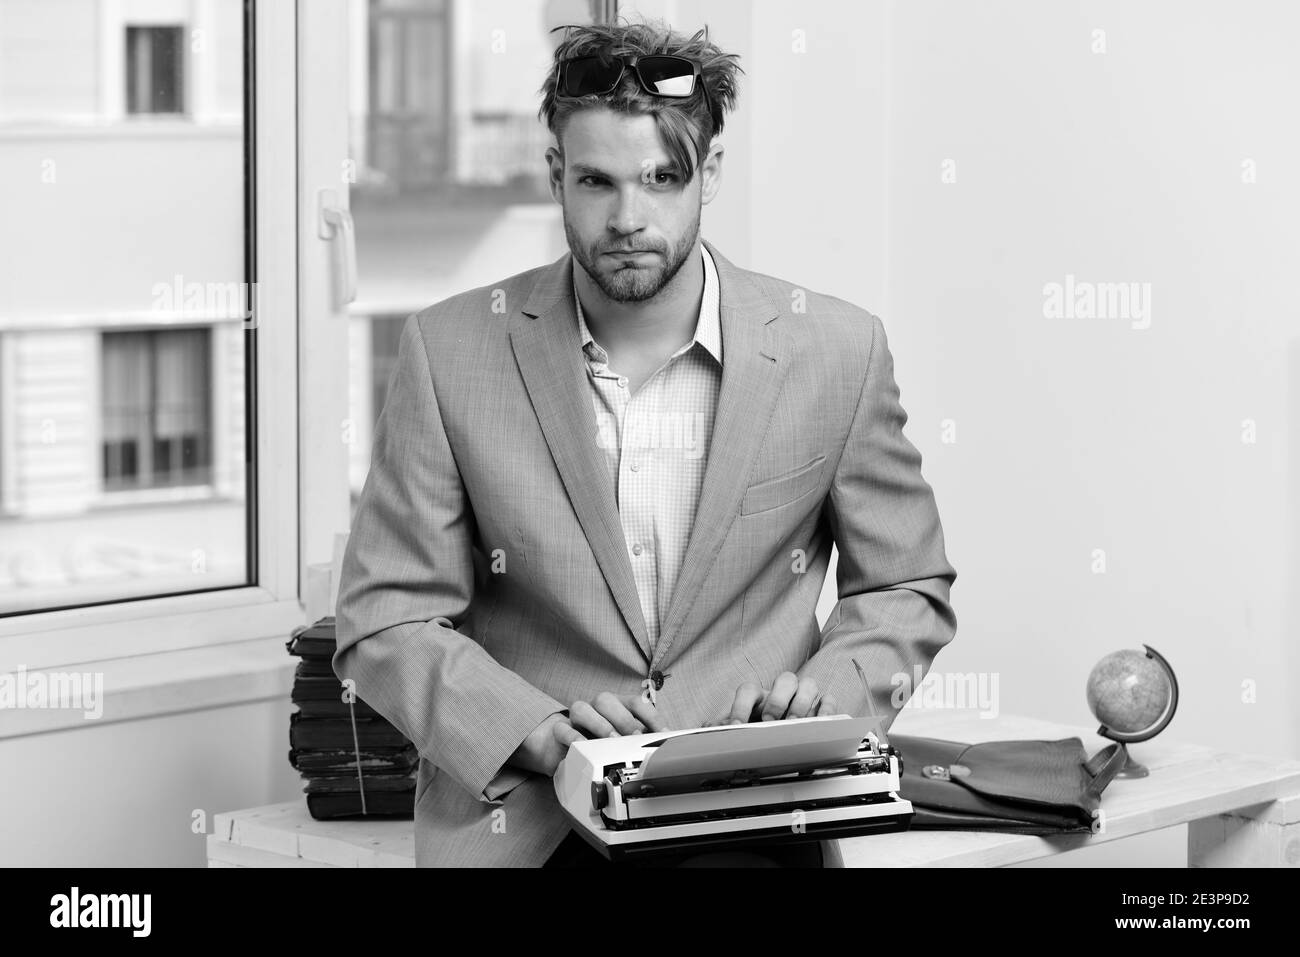 Writer or businessman wearing grey suit. Man with serious face types story  or business report. Young author or editor writes story on old typewriter  on window background. Editing and writing concept Stock